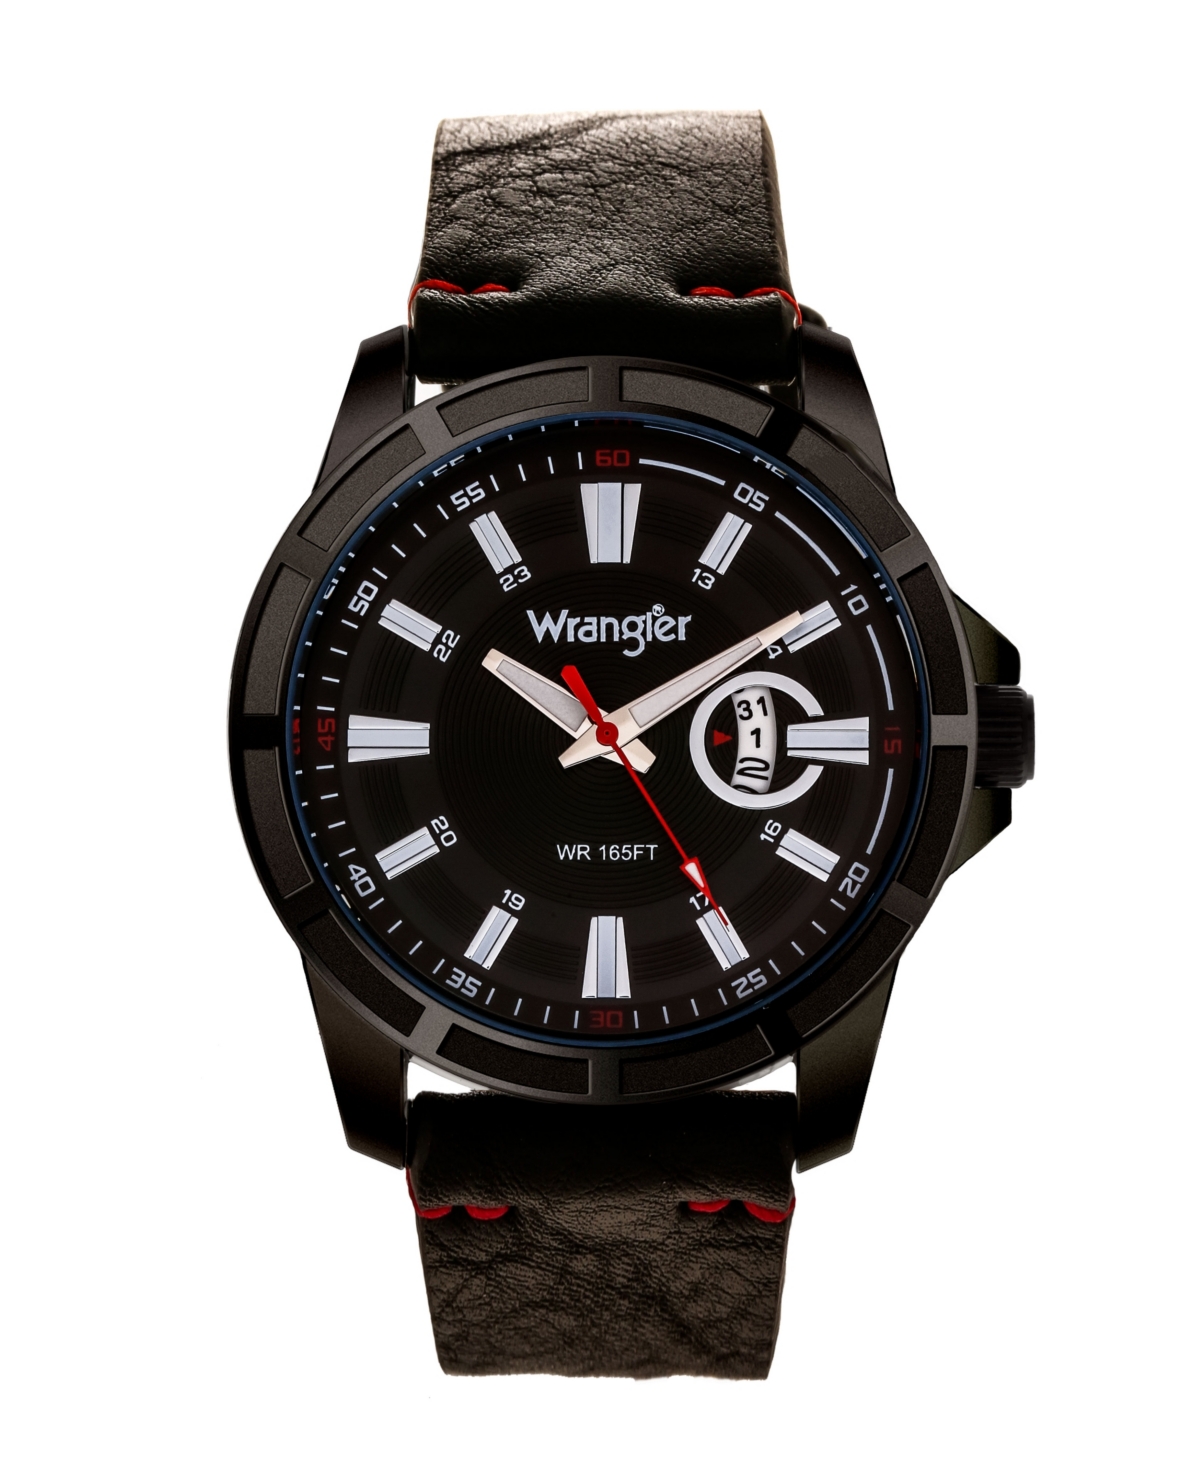 Men's Watch, 46MM Ip Black Case with Cutout Bezel, Black Milled Dial with White Index Markers, Analog, Red Second Hand and Cutout Crescent Da